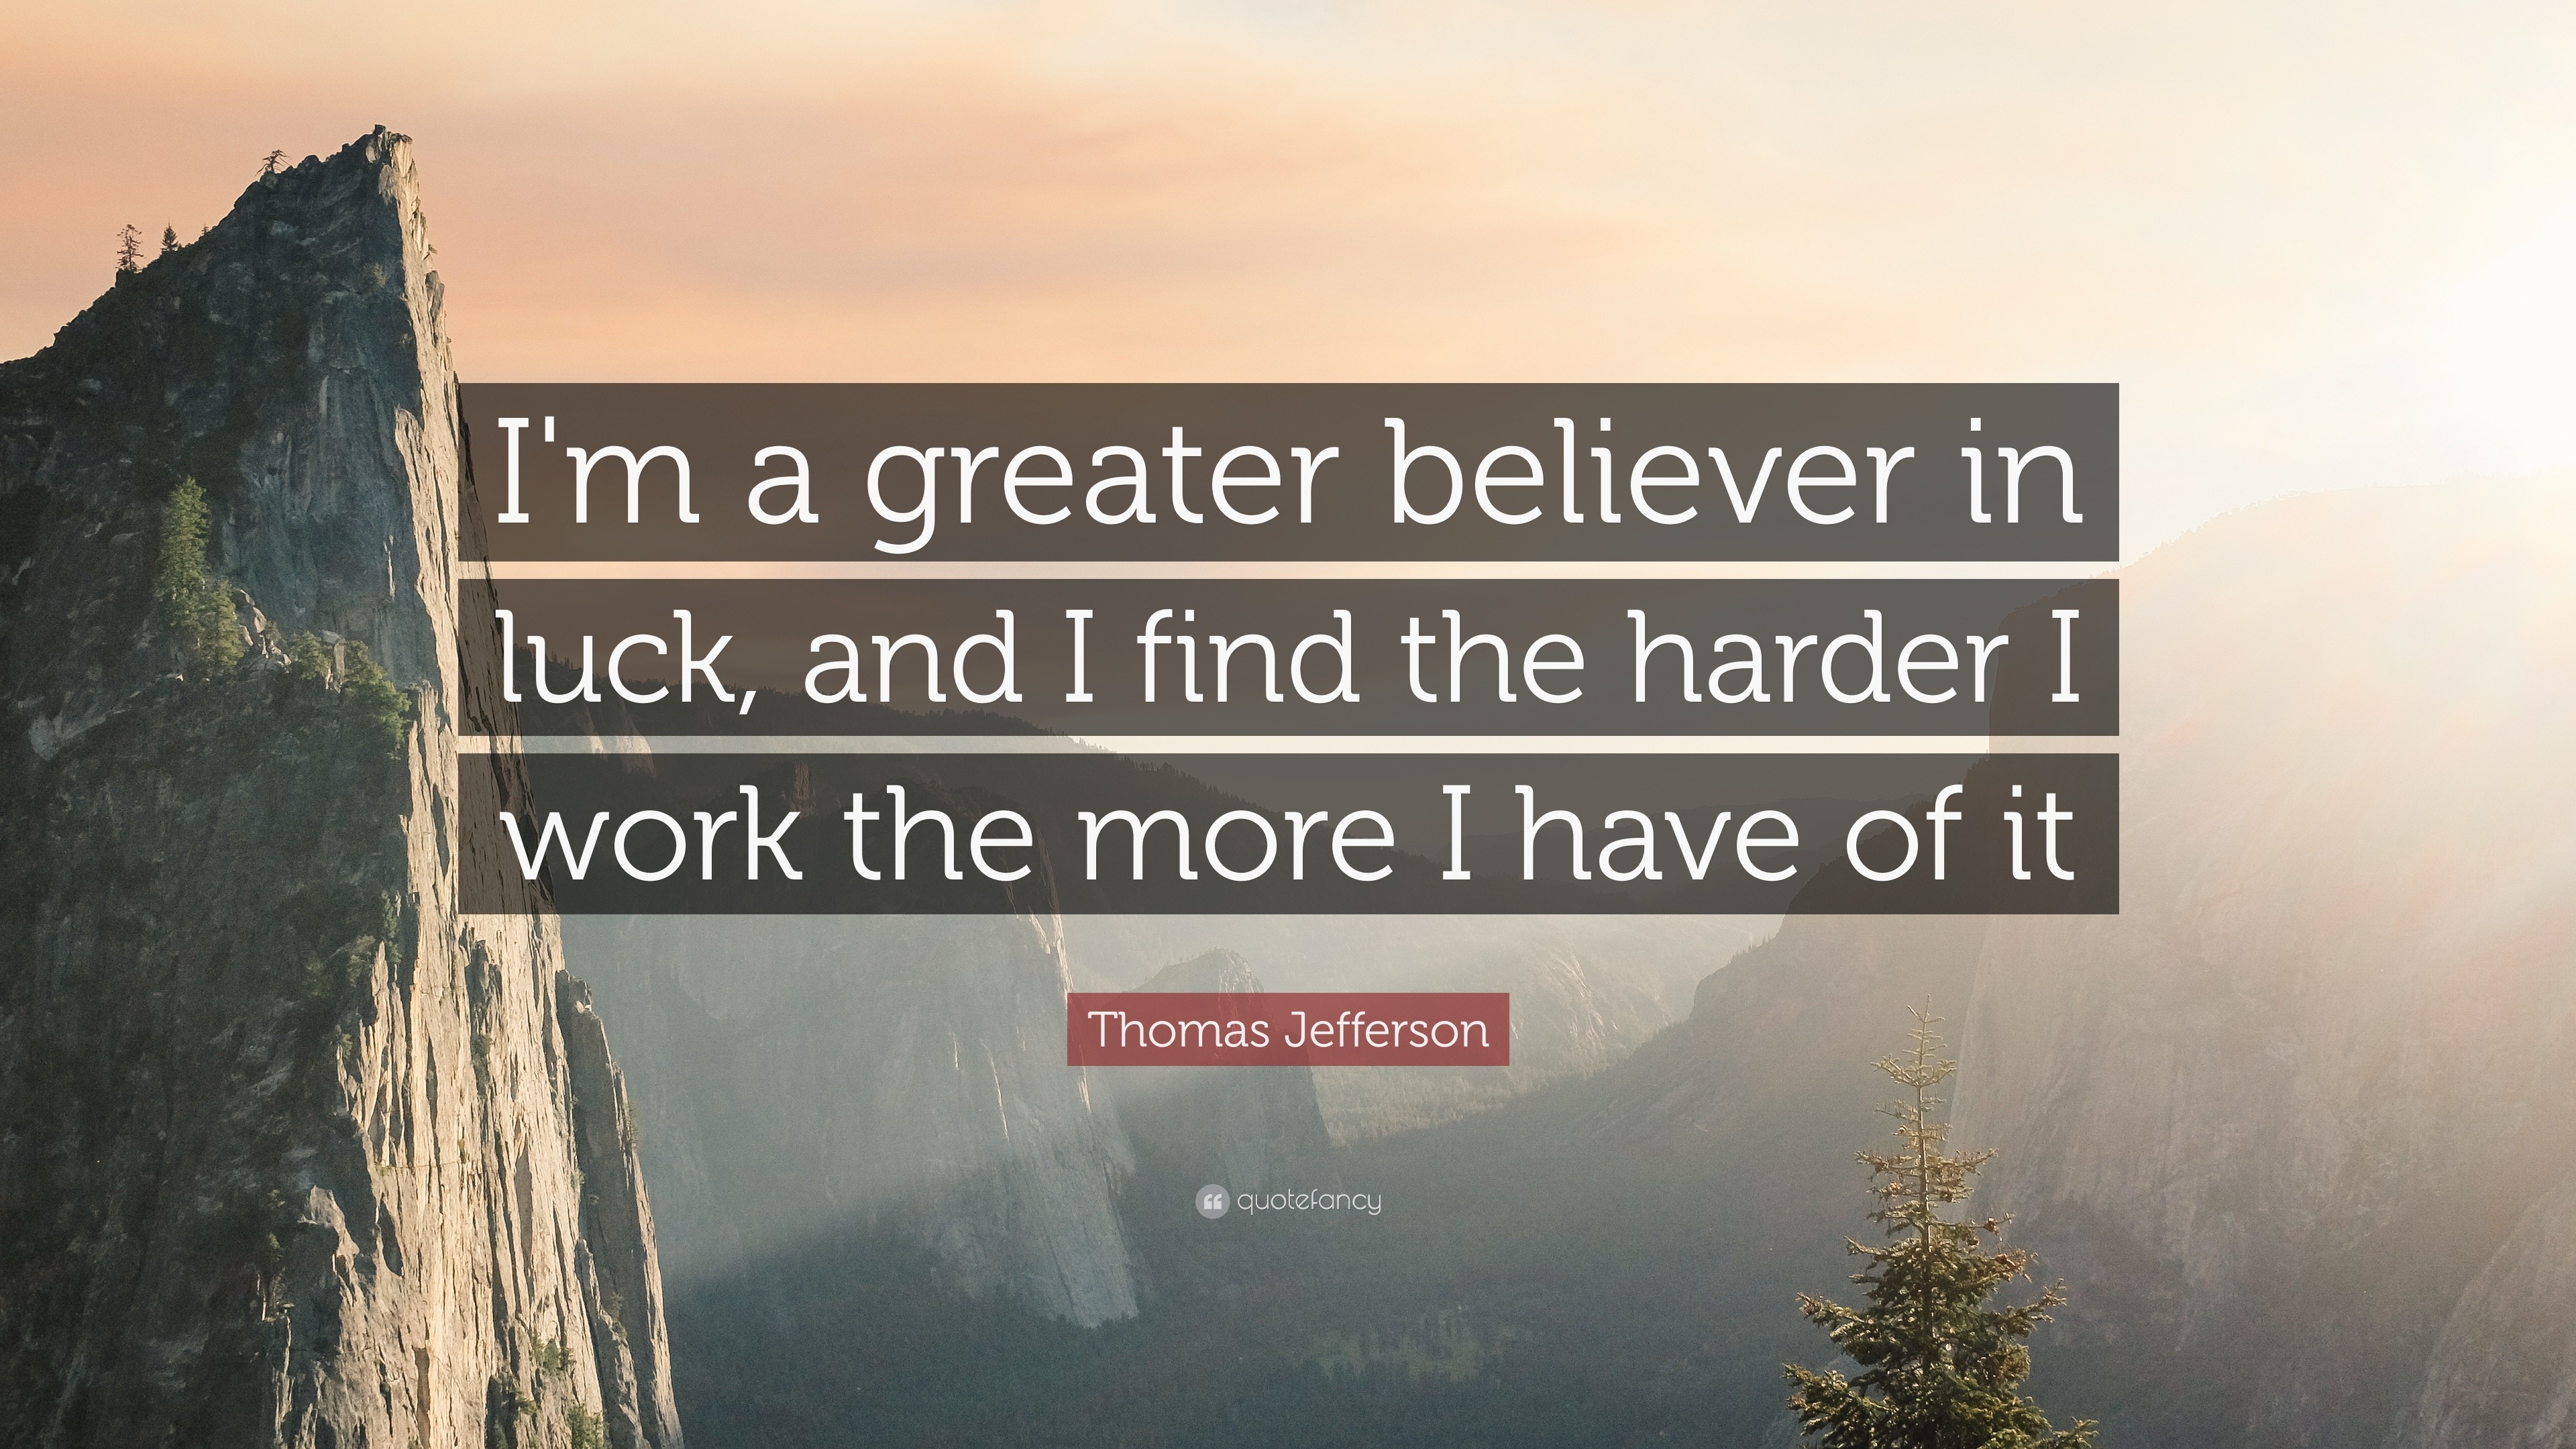 Thomas Jefferson Quote: “I'm a greater believer in luck, and I find the  harder I